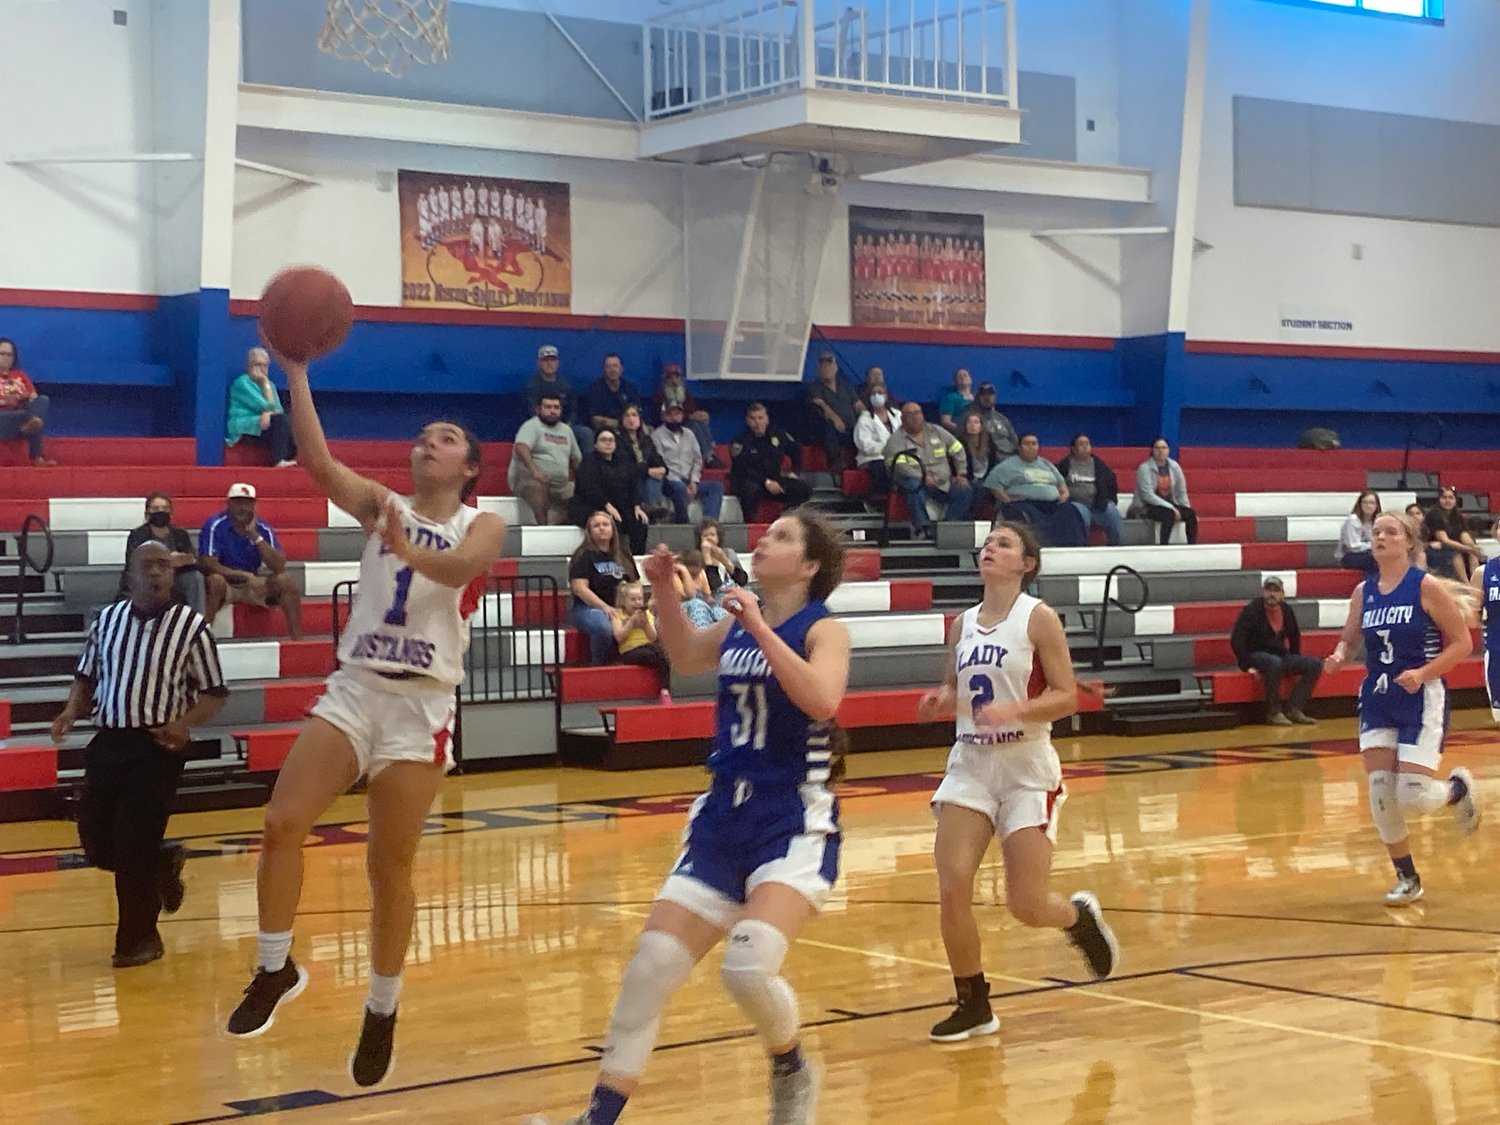 UP AND IN – Mady Velasquez (1) lays it up for two of her 11 points against Falls City.